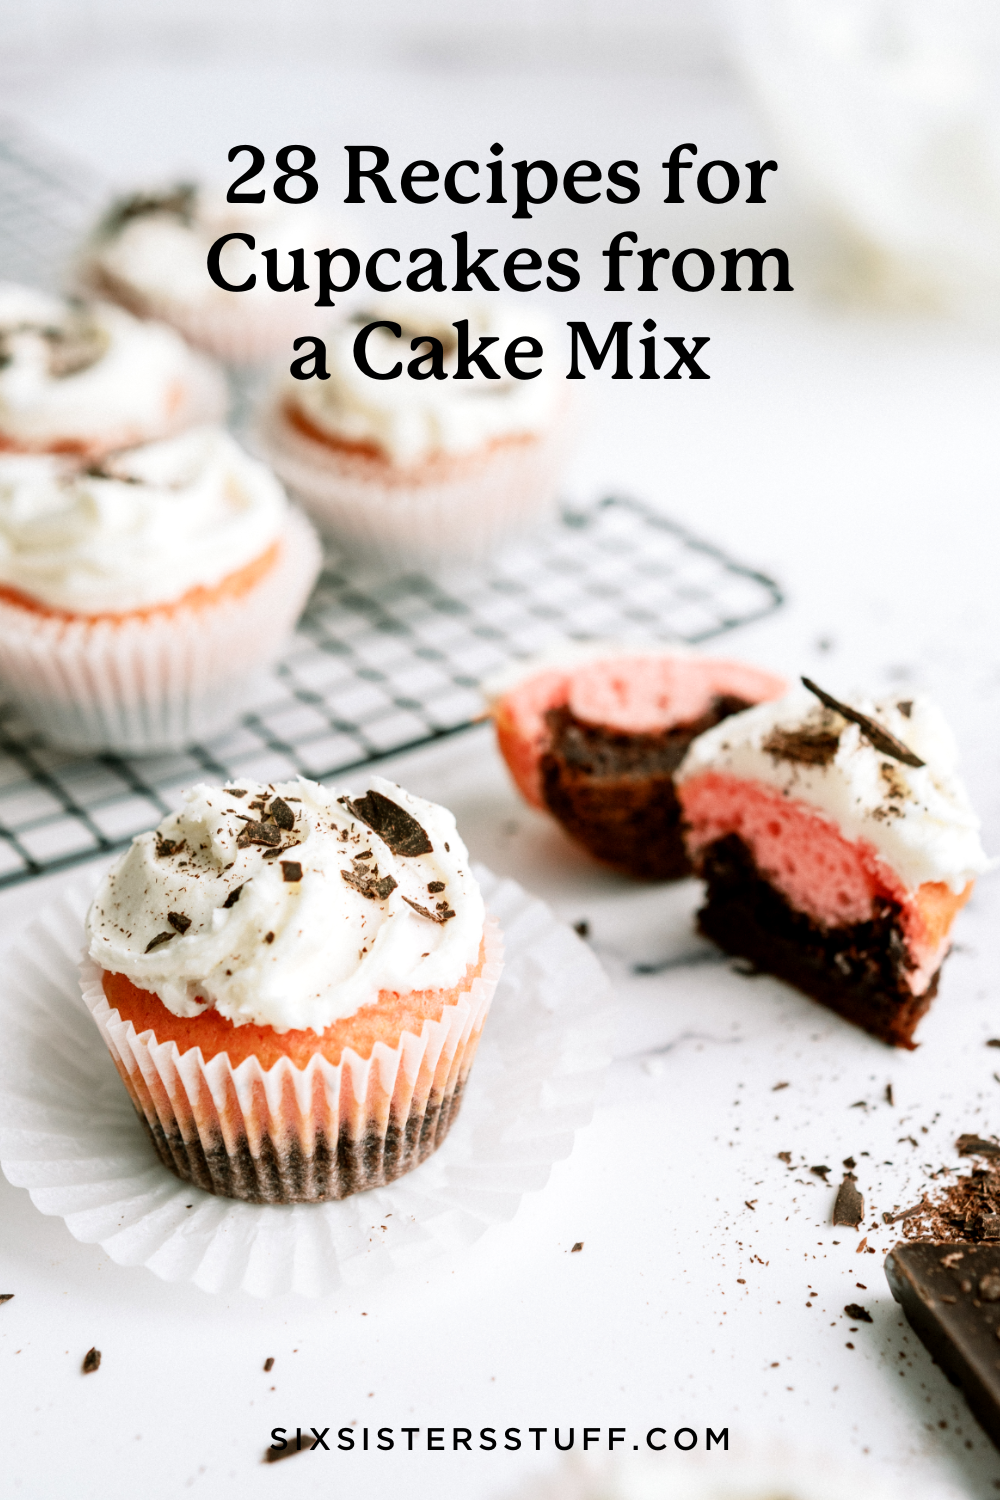 28 Recipes for Cupcakes from a Cake Mix